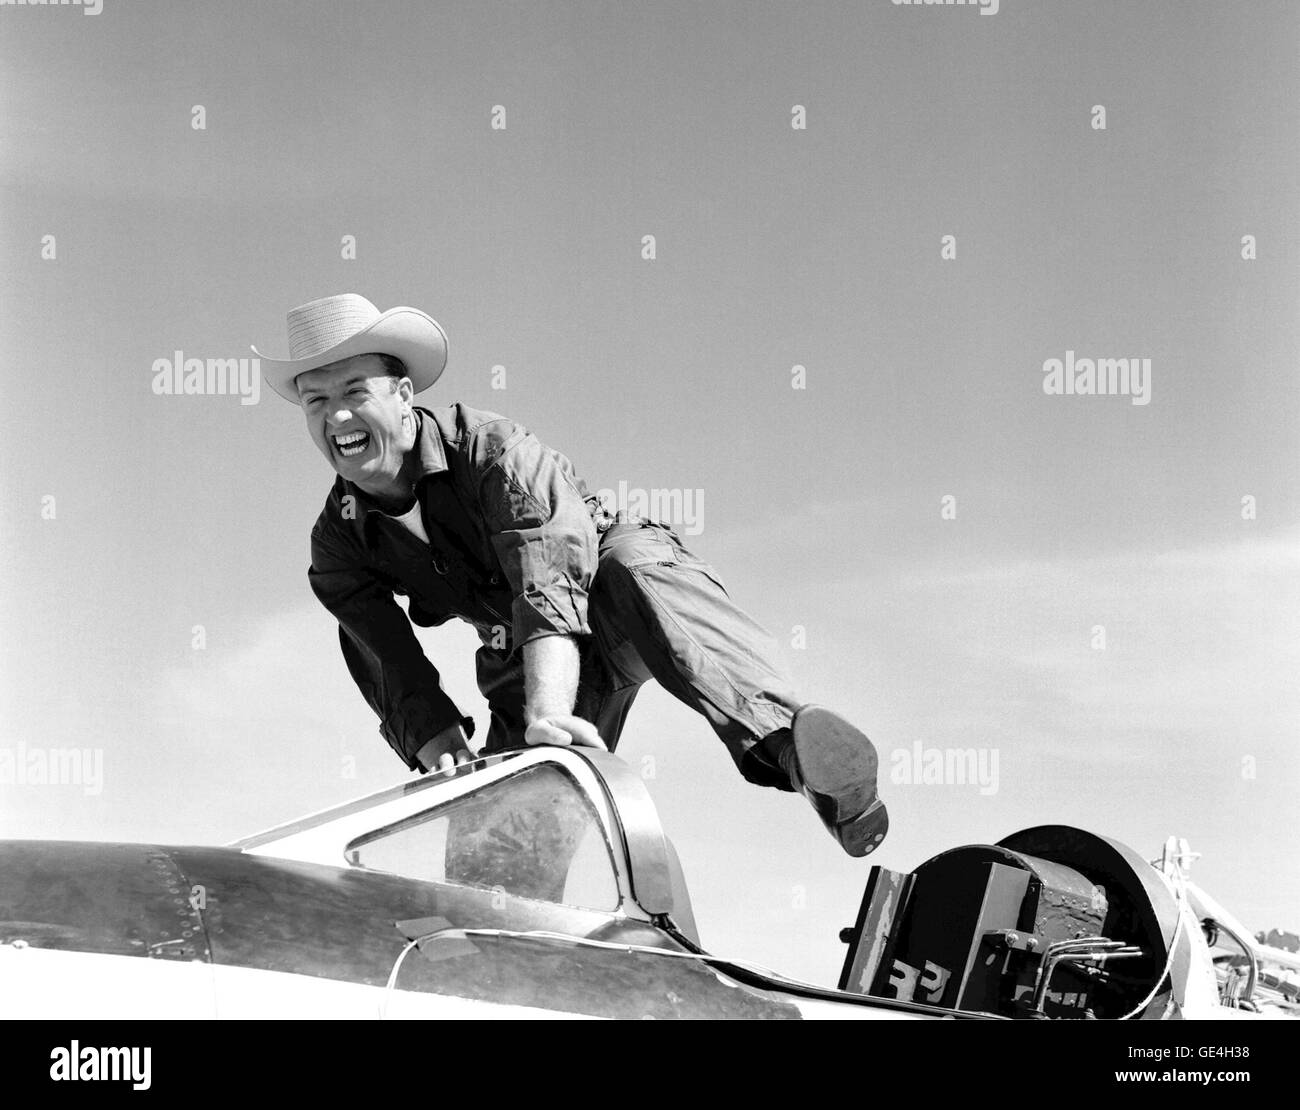 Description: Cowboy Joe (NACA High-Speed Flight Station test pilot Joseph Walker) and his steed (Bell Aircraft Corporation X-1A). A happy Joe was photographed in 1955 at Edwards, California. The X-1A was flown six times by Bell Aircraft Company pilot Jean &quot;Skip&quot; Ziegler in 1953. Air Force test pilots Major Charles &quot;Chuck&quot; Yeager and Major Arthur &quot;Kit&quot; Murray made 18 flights between November 21, 1953 and August 26, 1954. The X-1A was then turned over to the NACA. Joe Walker piloted the first NACA flight on July 20, 1955. Walker attempted a second flight on August 8 Stock Photo